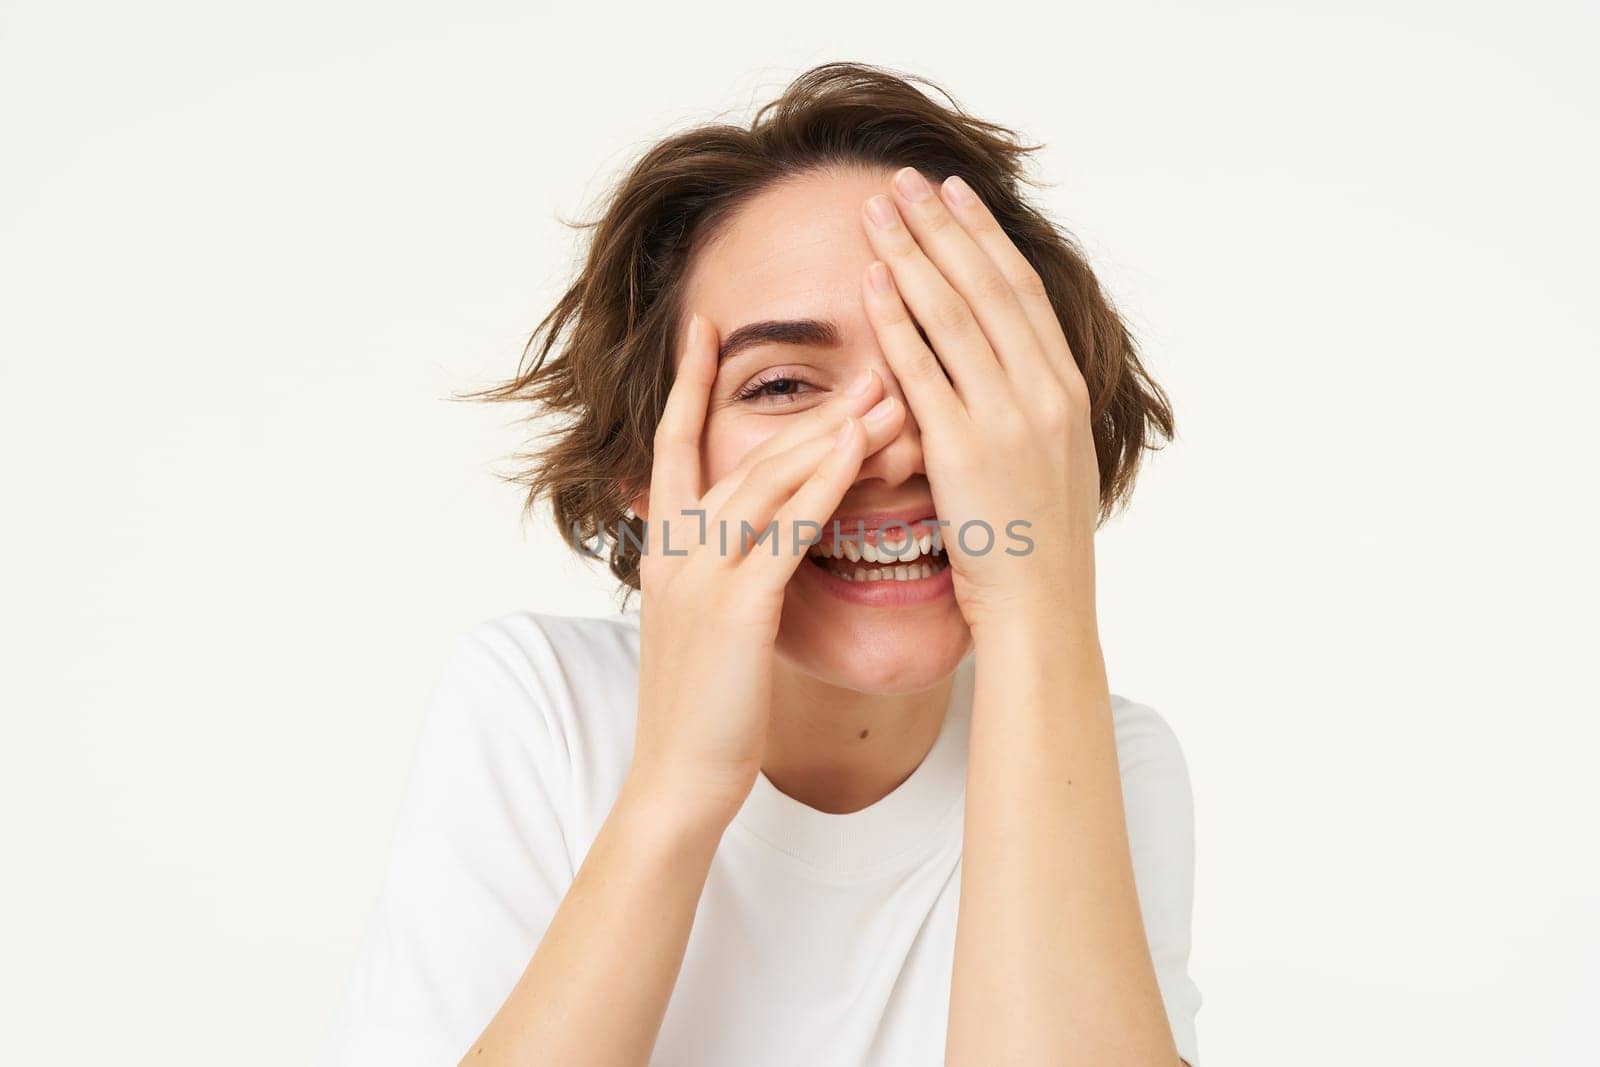 Genuine young woman, laughing and smiling, peeking through fingers and looking at surprise, standing over white background. Copy space